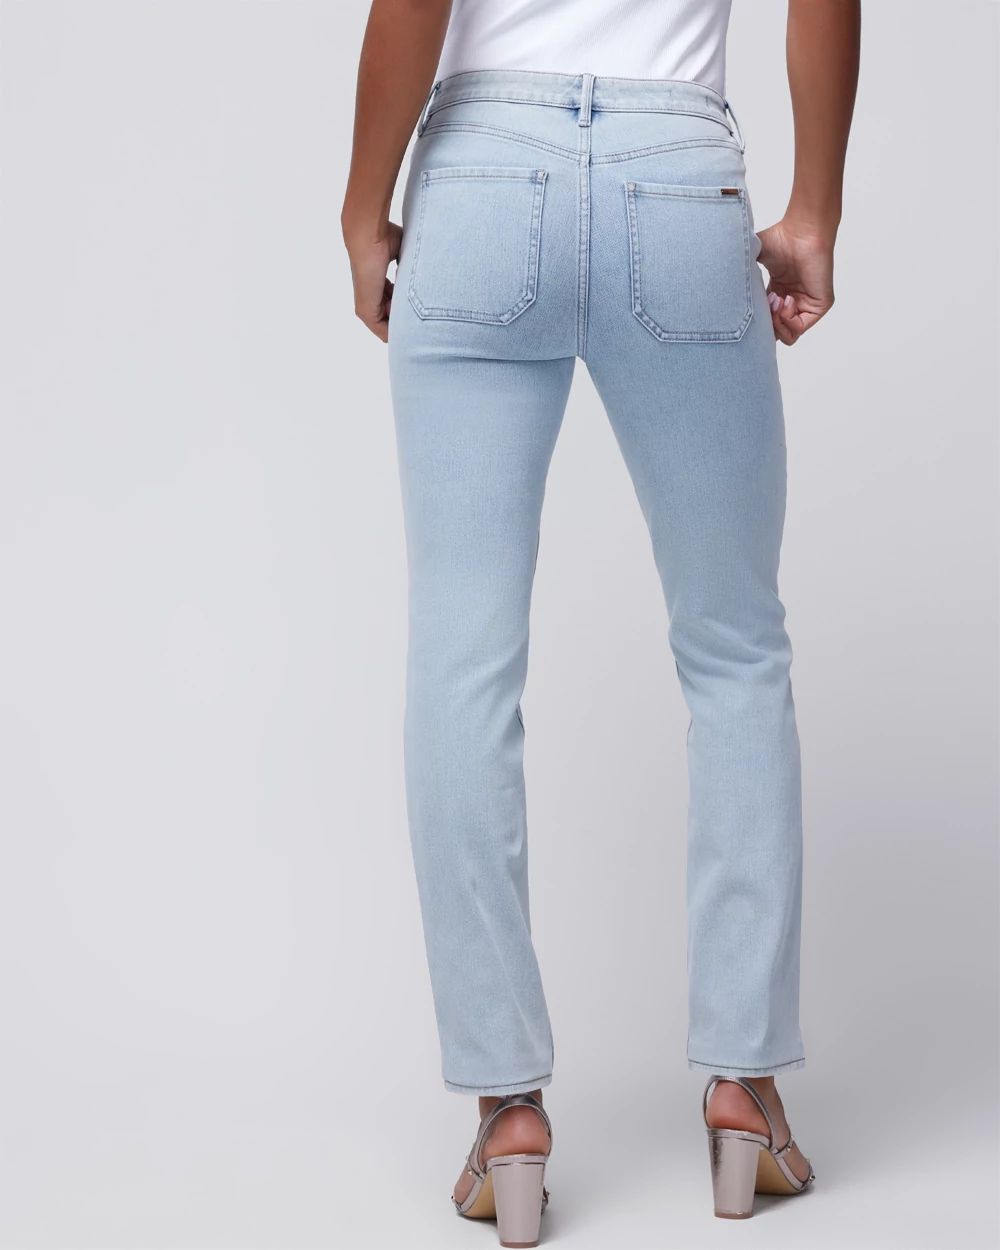 High-Rise Sculpt Straight Braided Pocket Jeans click to view larger image.